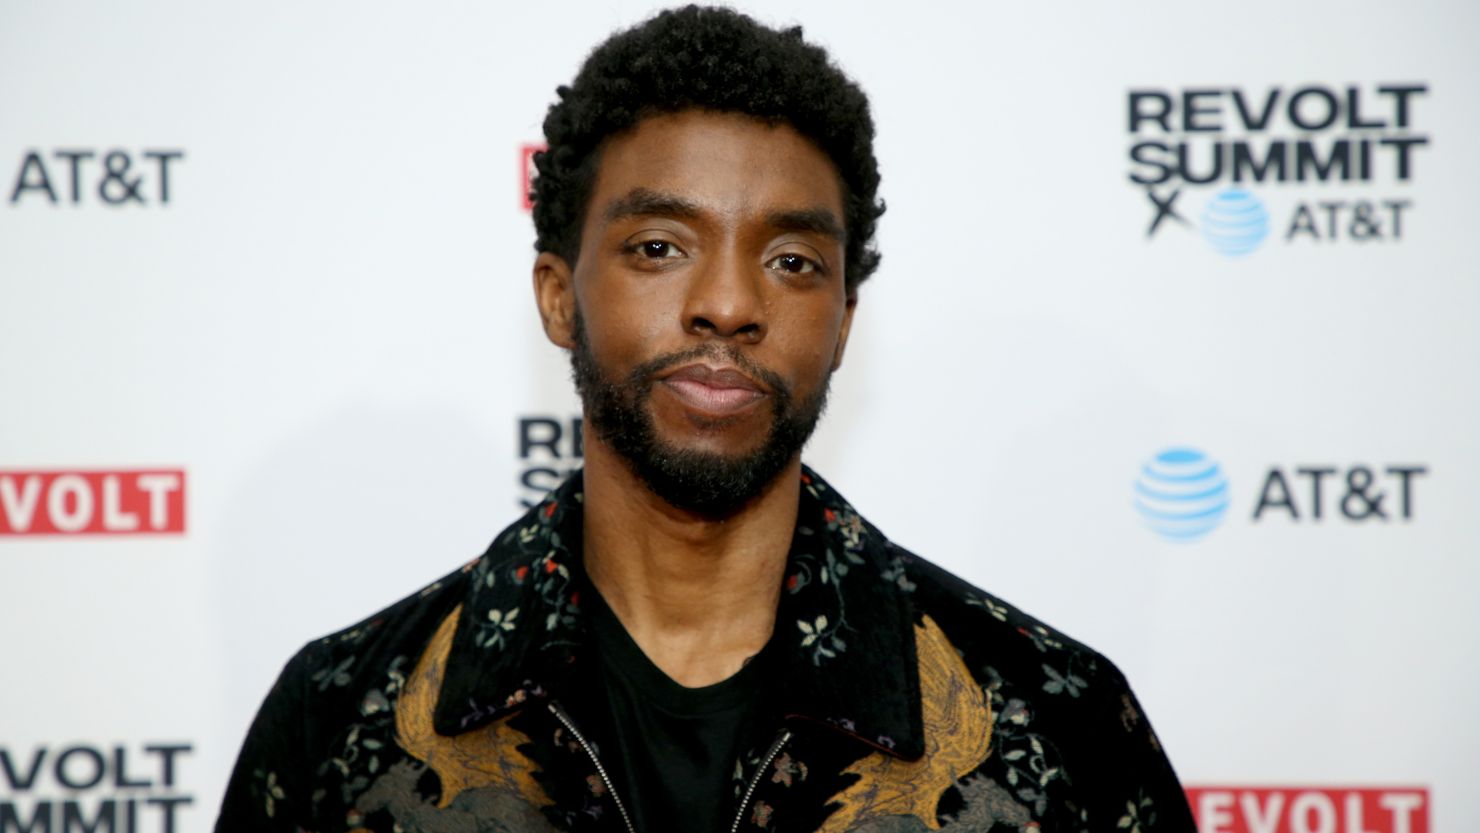 Chadwick Boseman died of colon cancer last year at age 43.